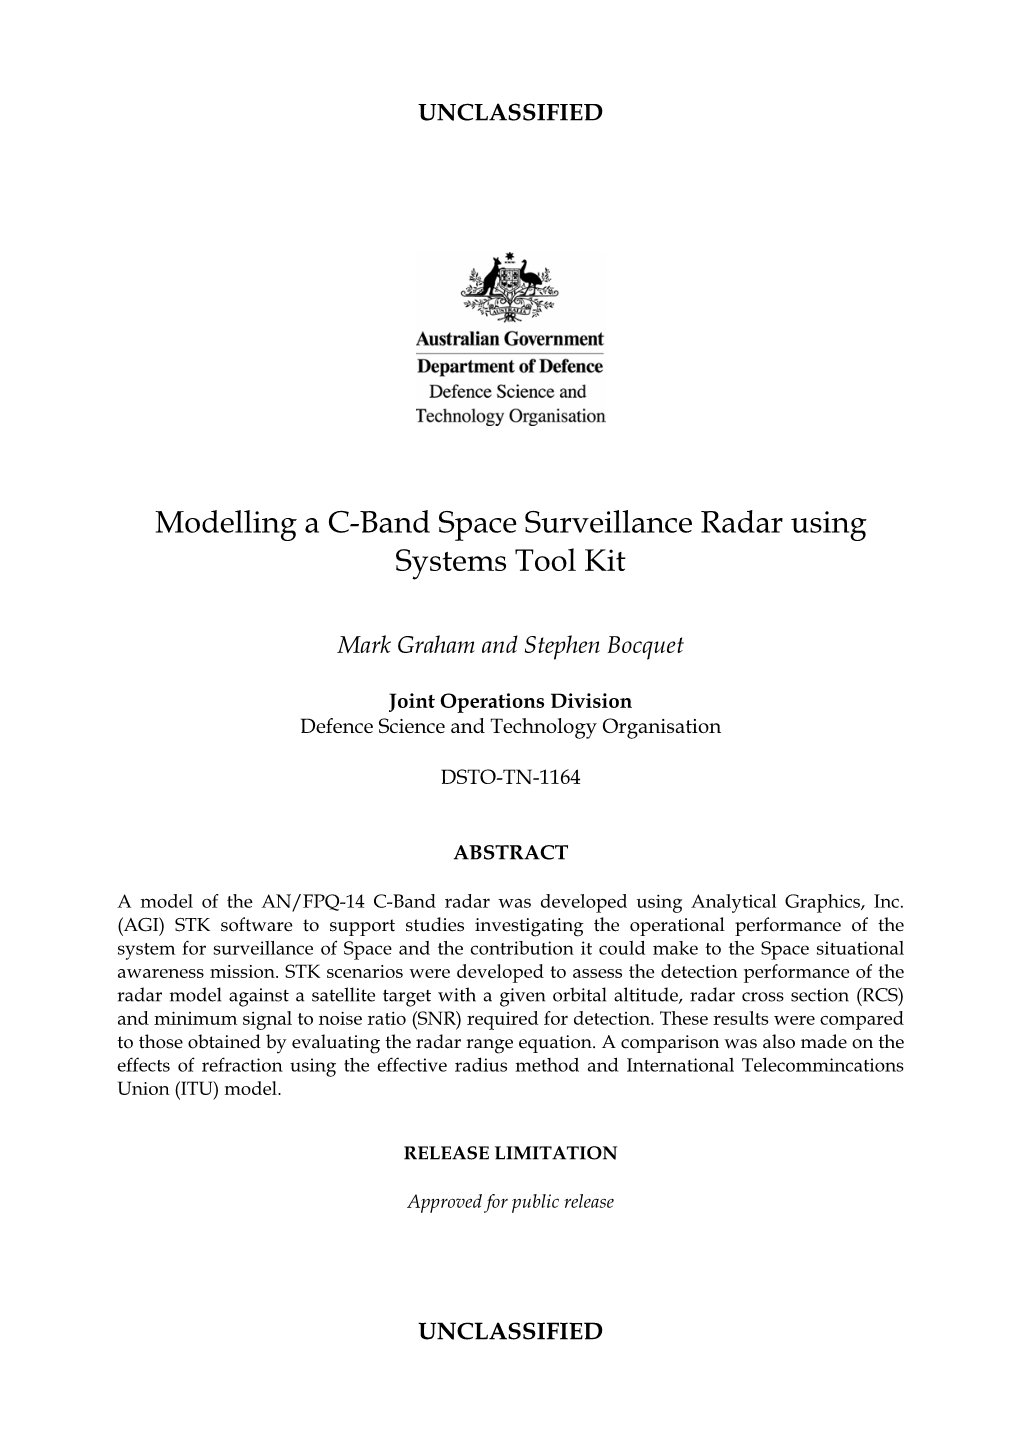 Modelling a C-Band Space Surveillance Radar Using Systems Tool Kit